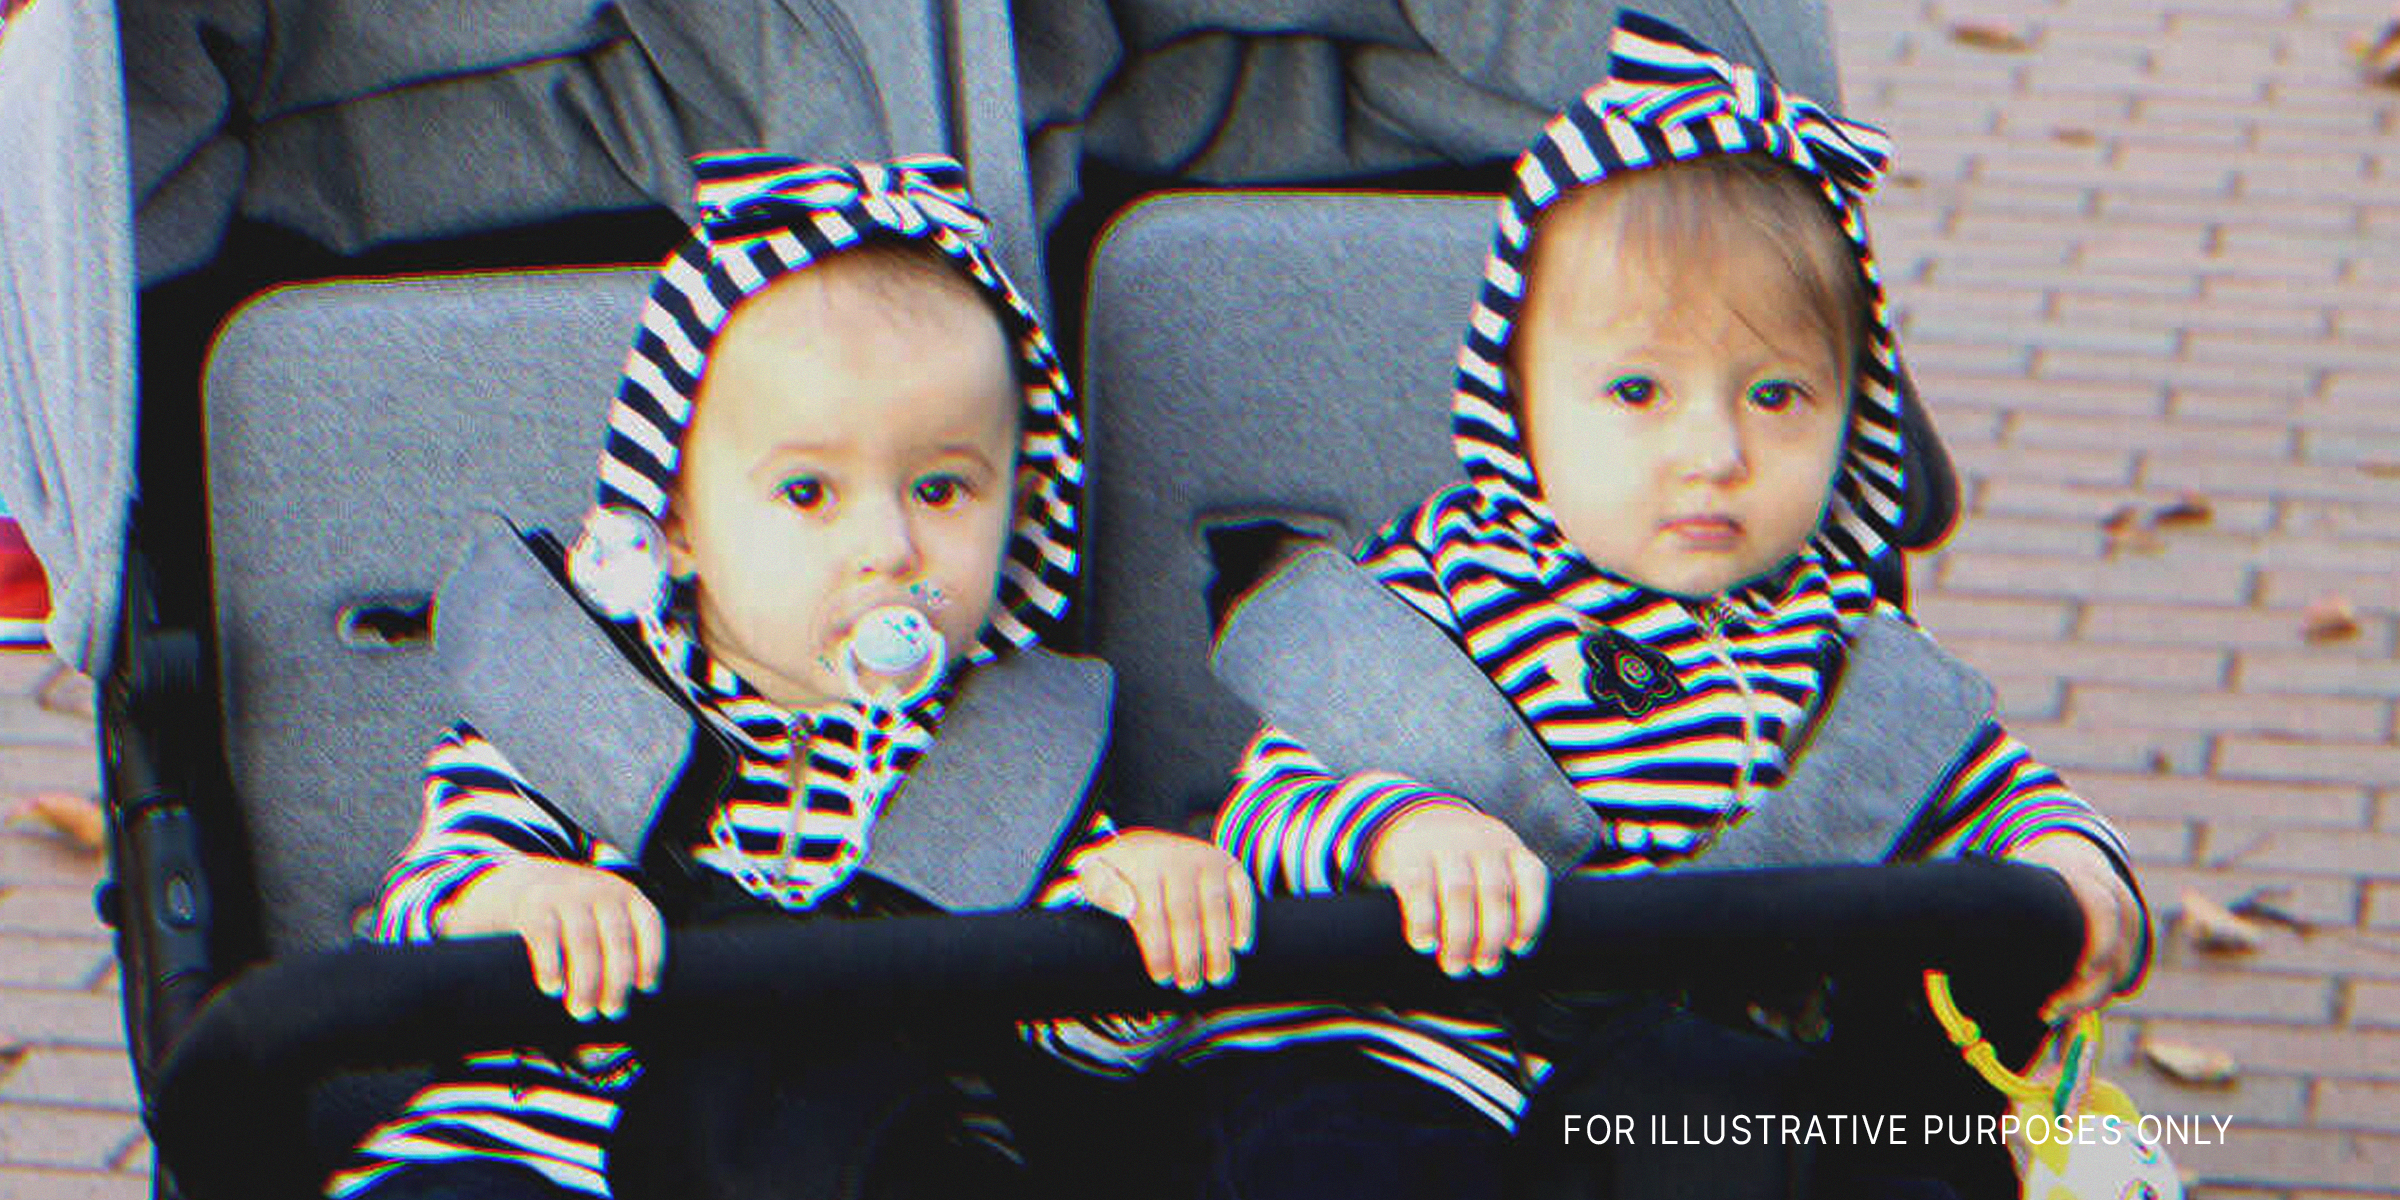 A photo of twins on a stroller | Source: Shutterstock